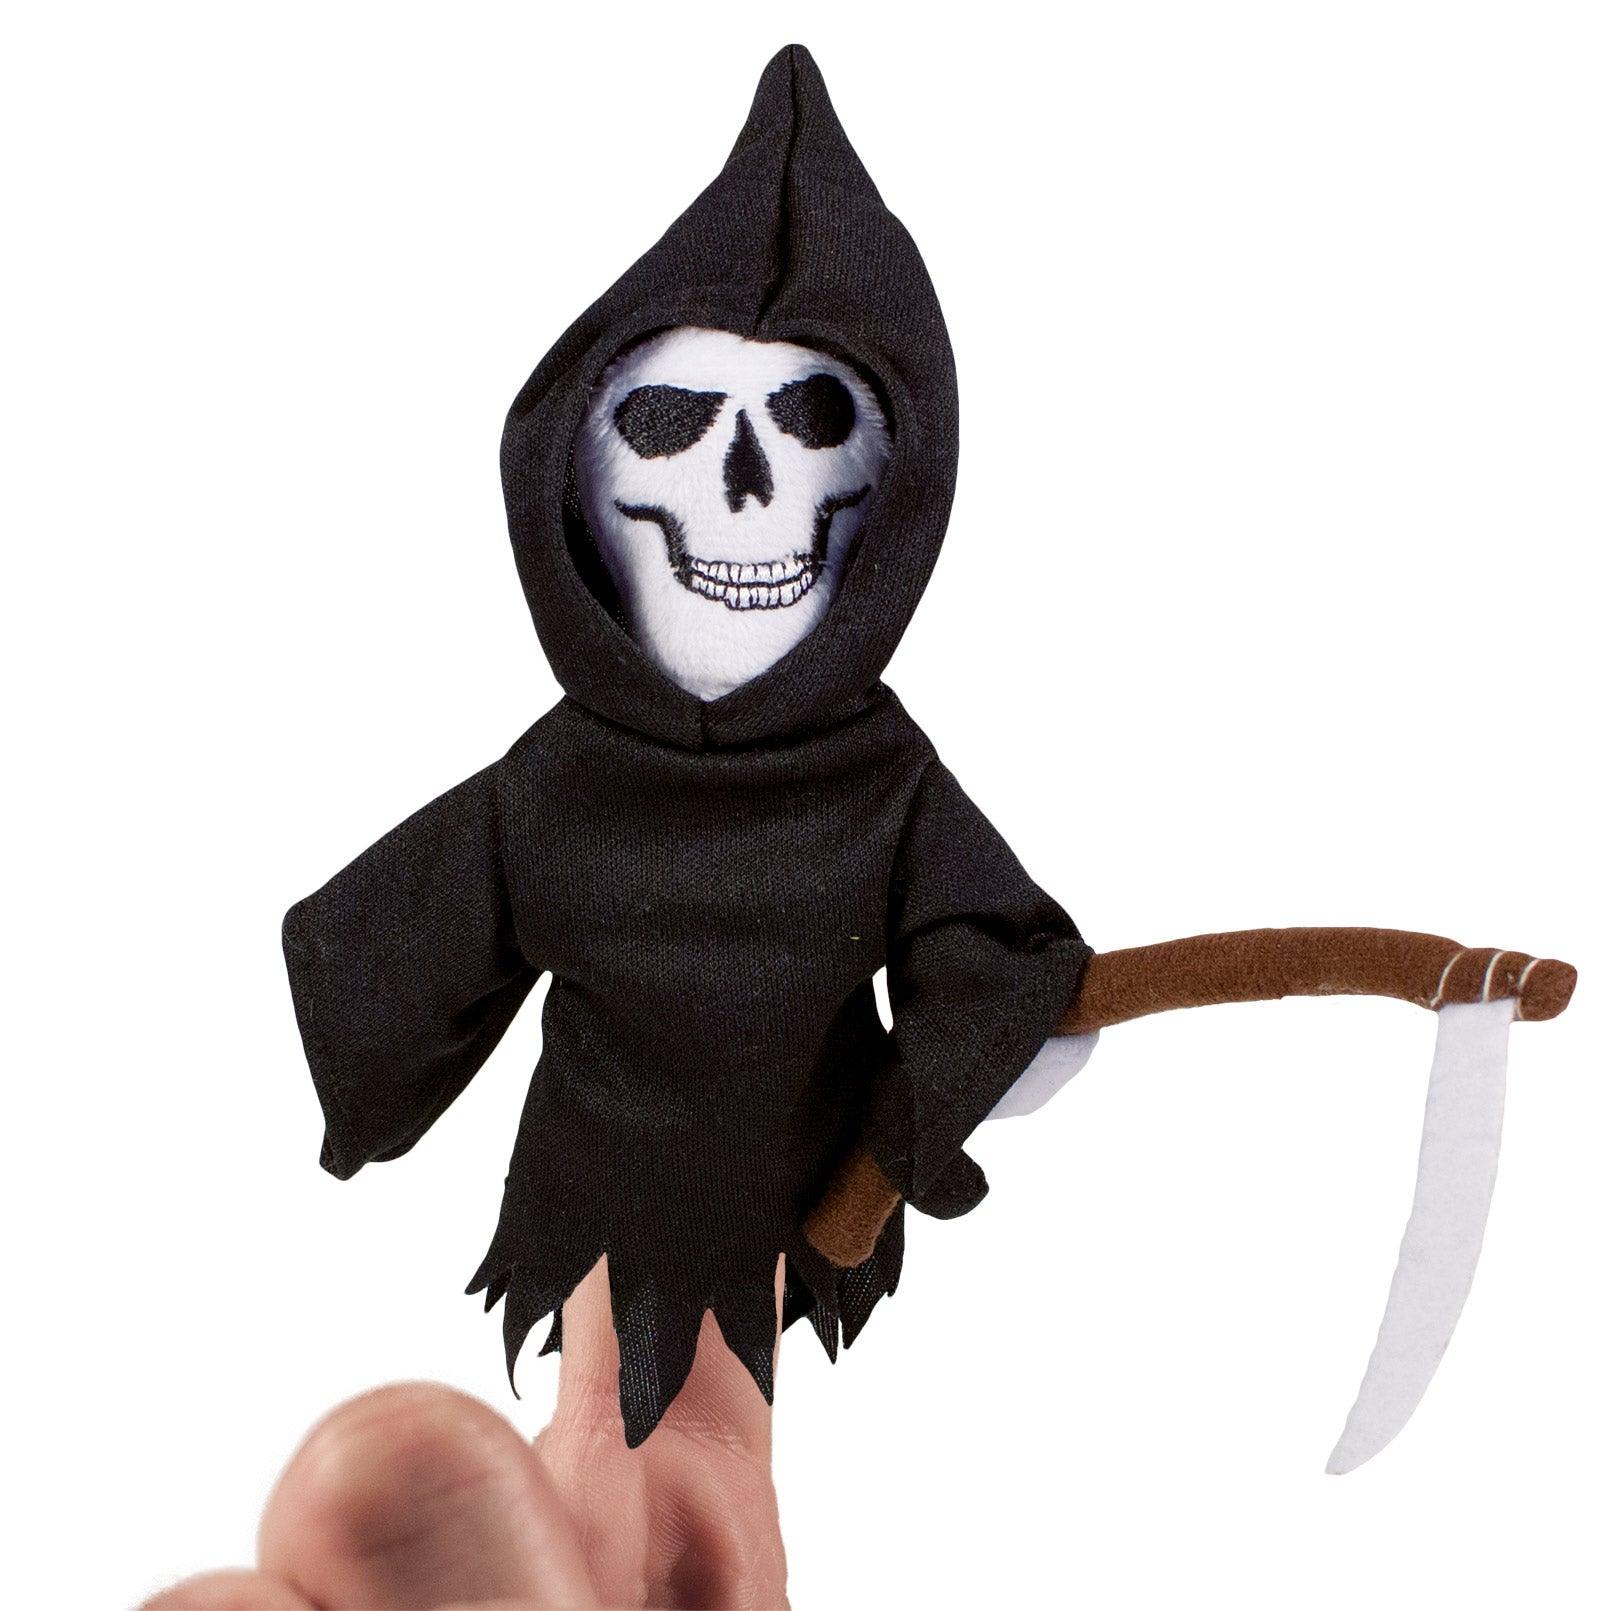 Front view of the Grim Reaper finger puppet against a white background.